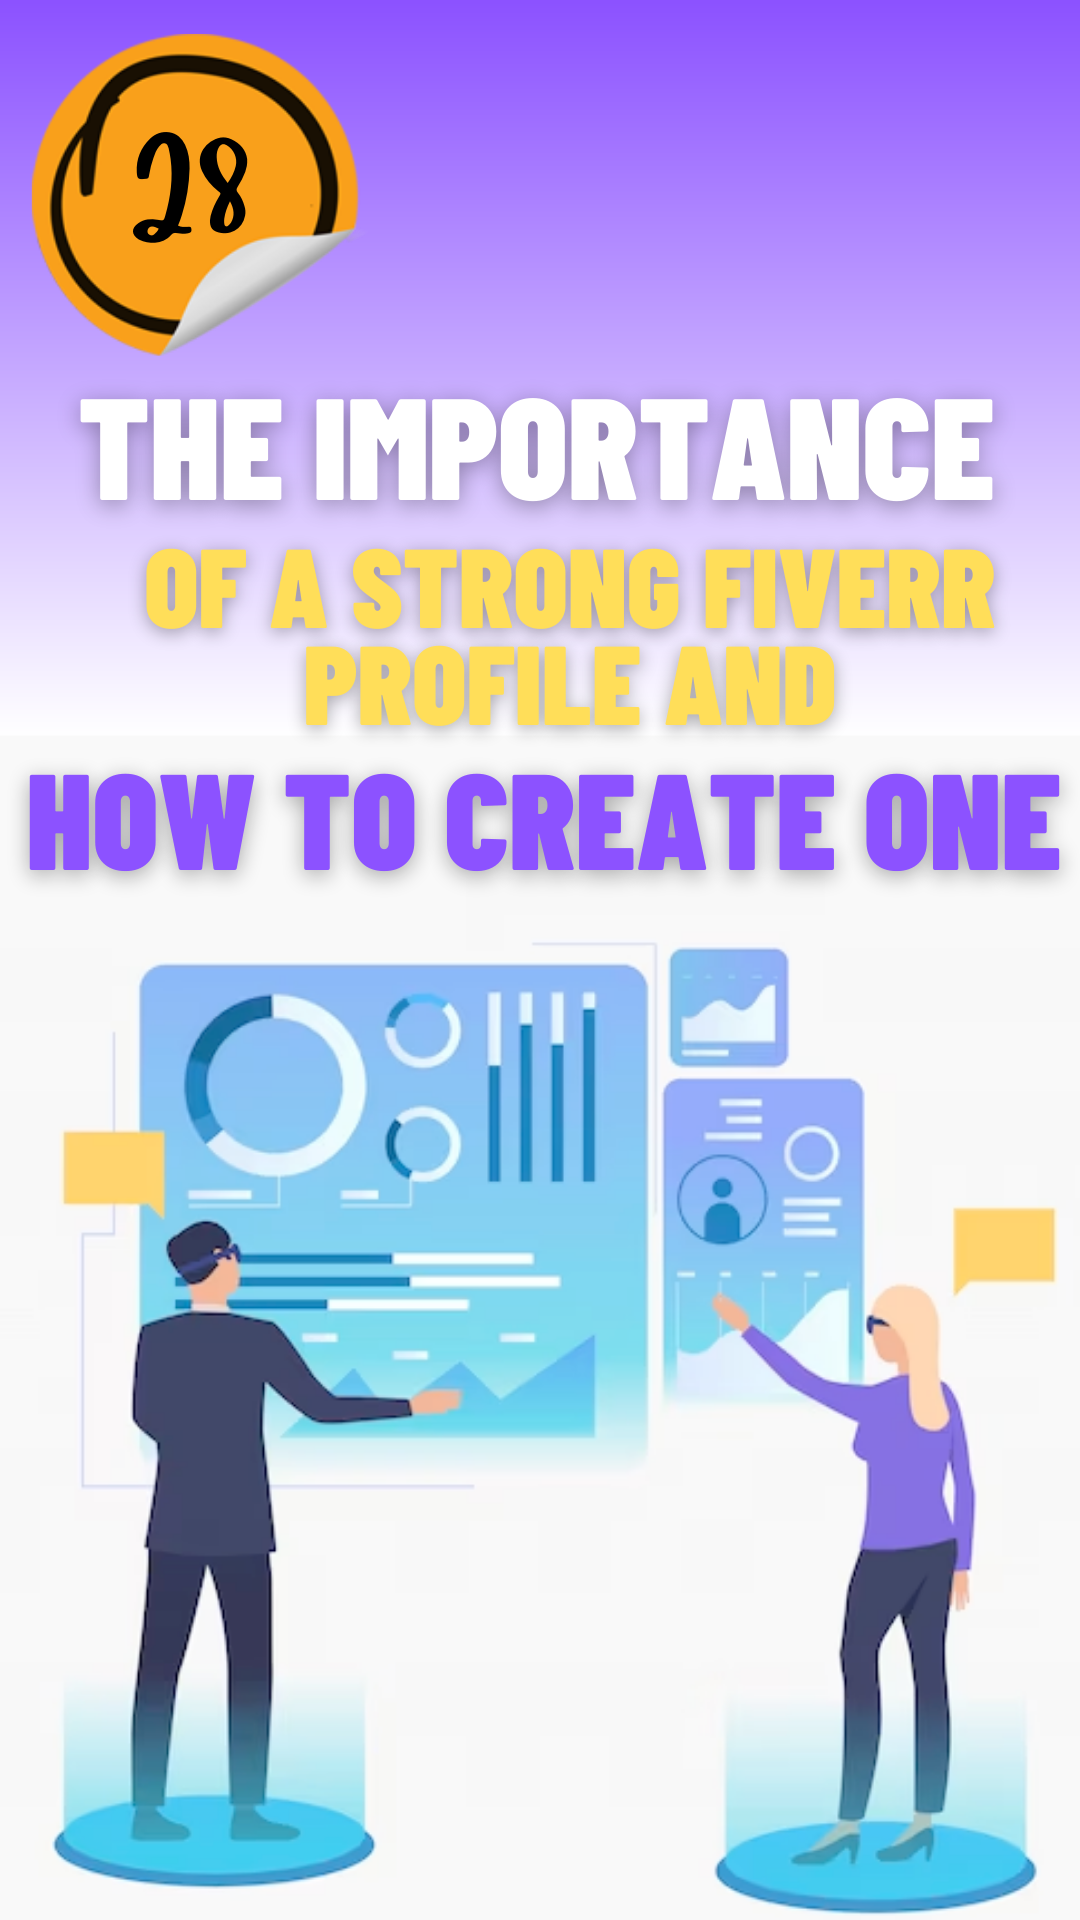 The importance of a strong fiverr profile and how to create one